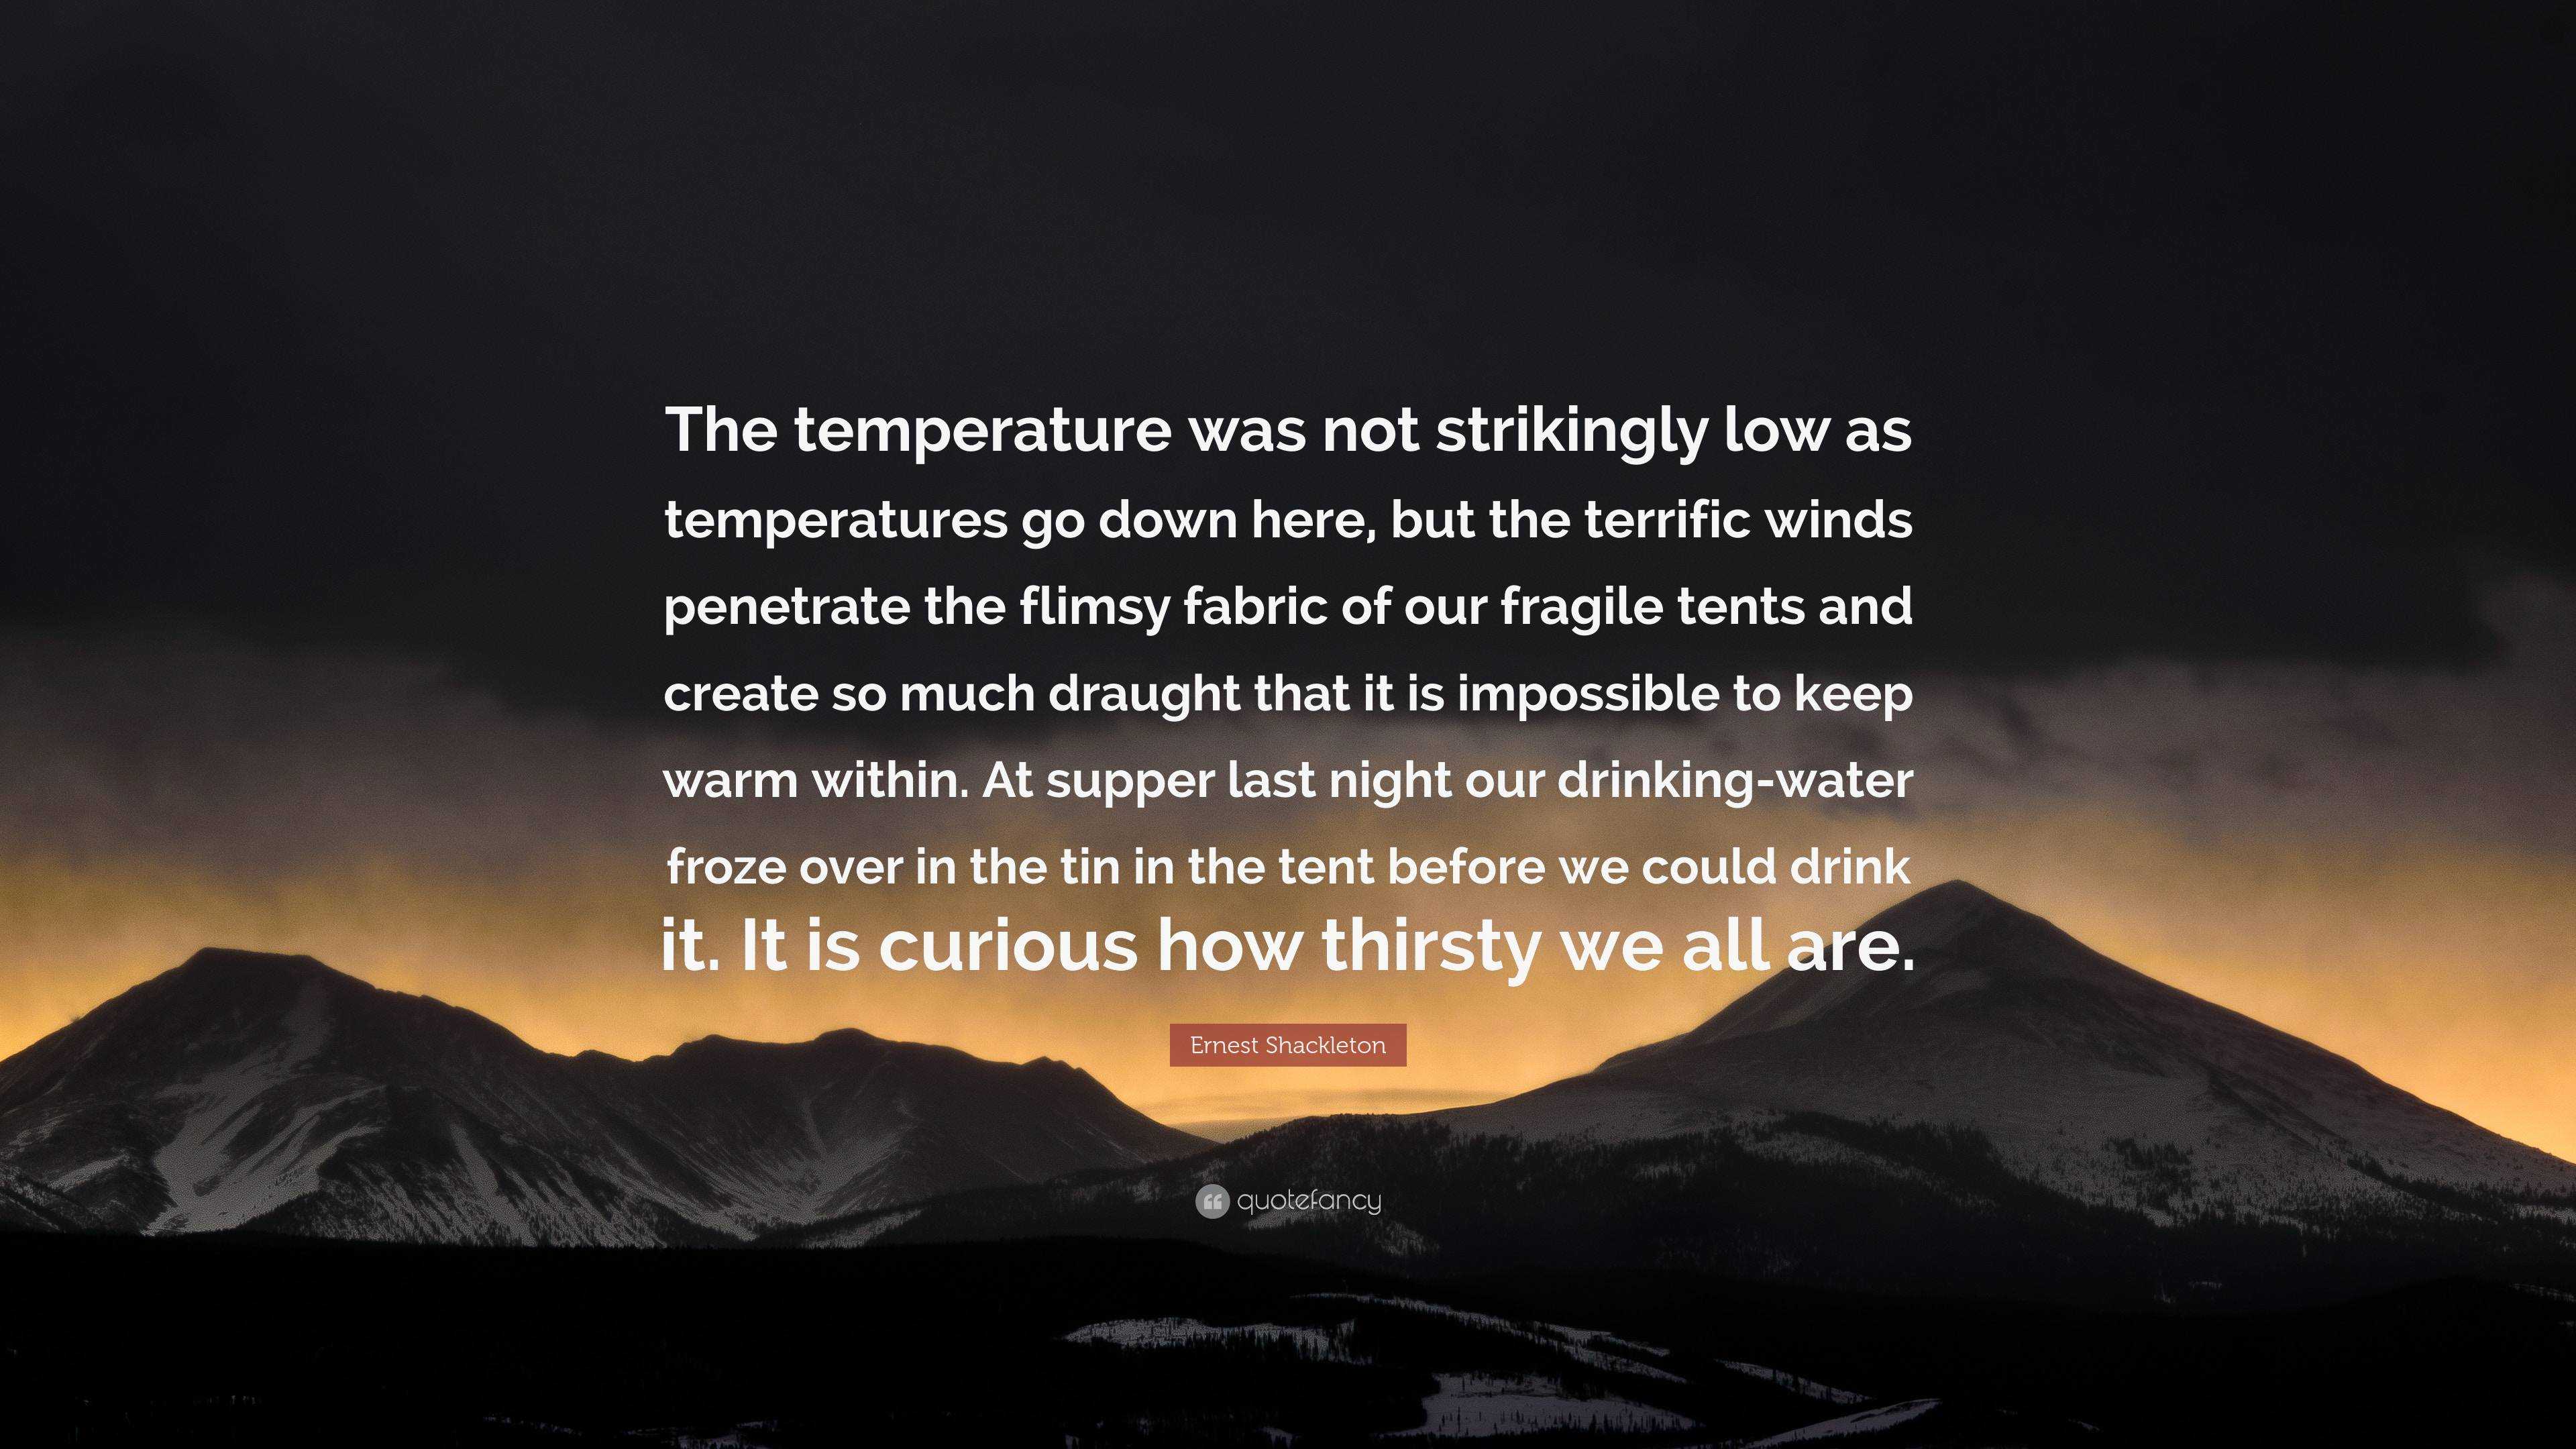 Ernest Shackleton Quote: “The temperature was not strikingly low as ...